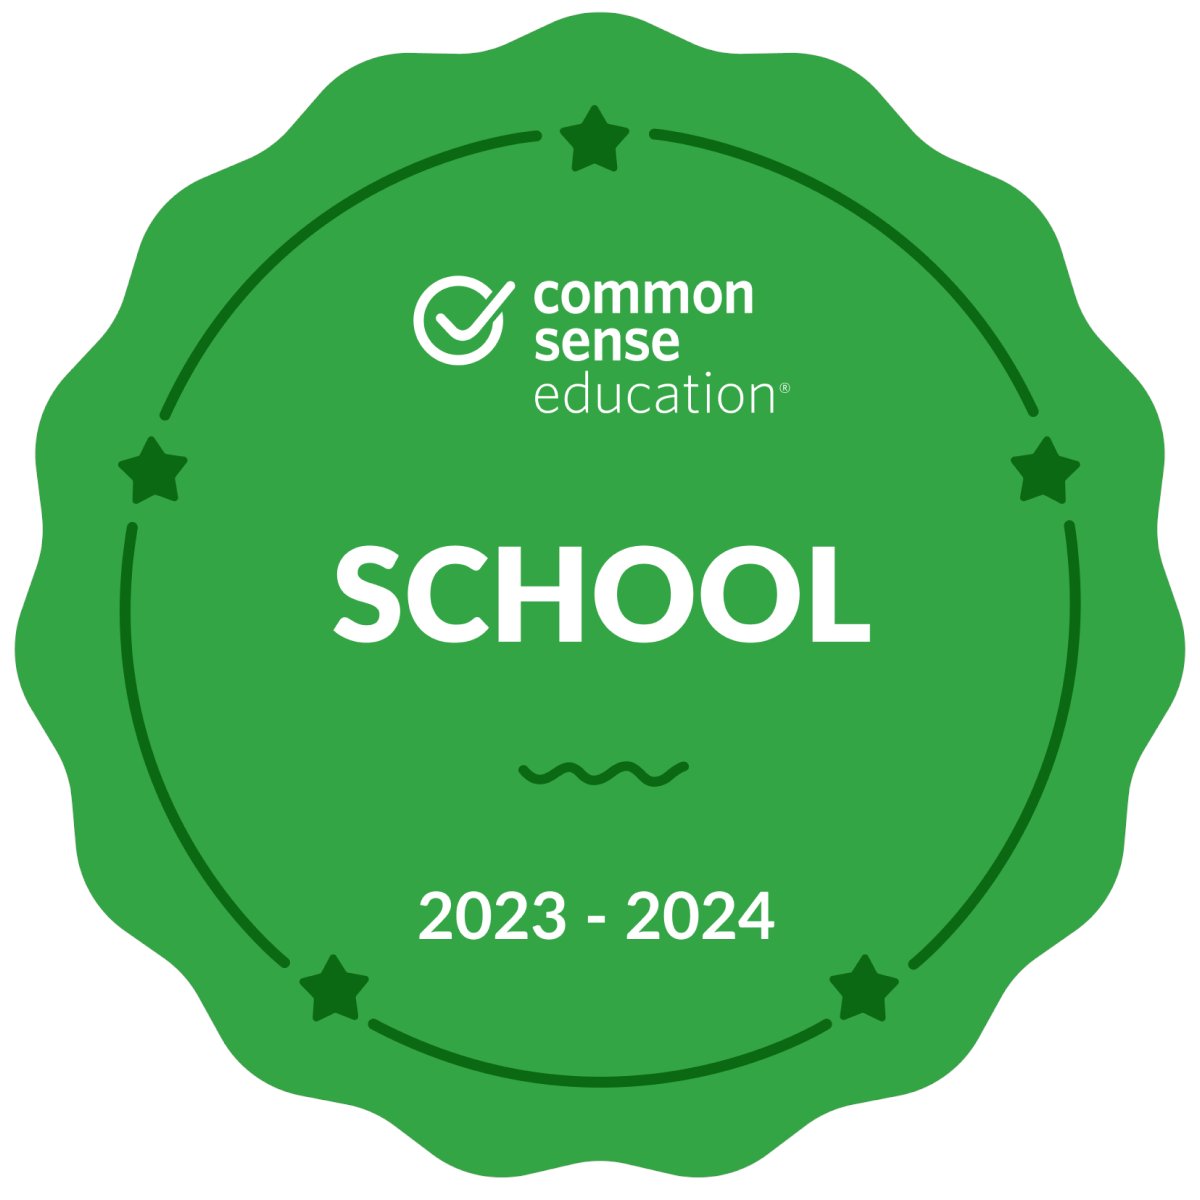 Congratulations to @FlorisSchool staff and students in @FCPSR5! They just became a Common Sense Recognized School dedicated to helping their students thrive online as safe, responsible, empathetic, and ethical digital citizens.